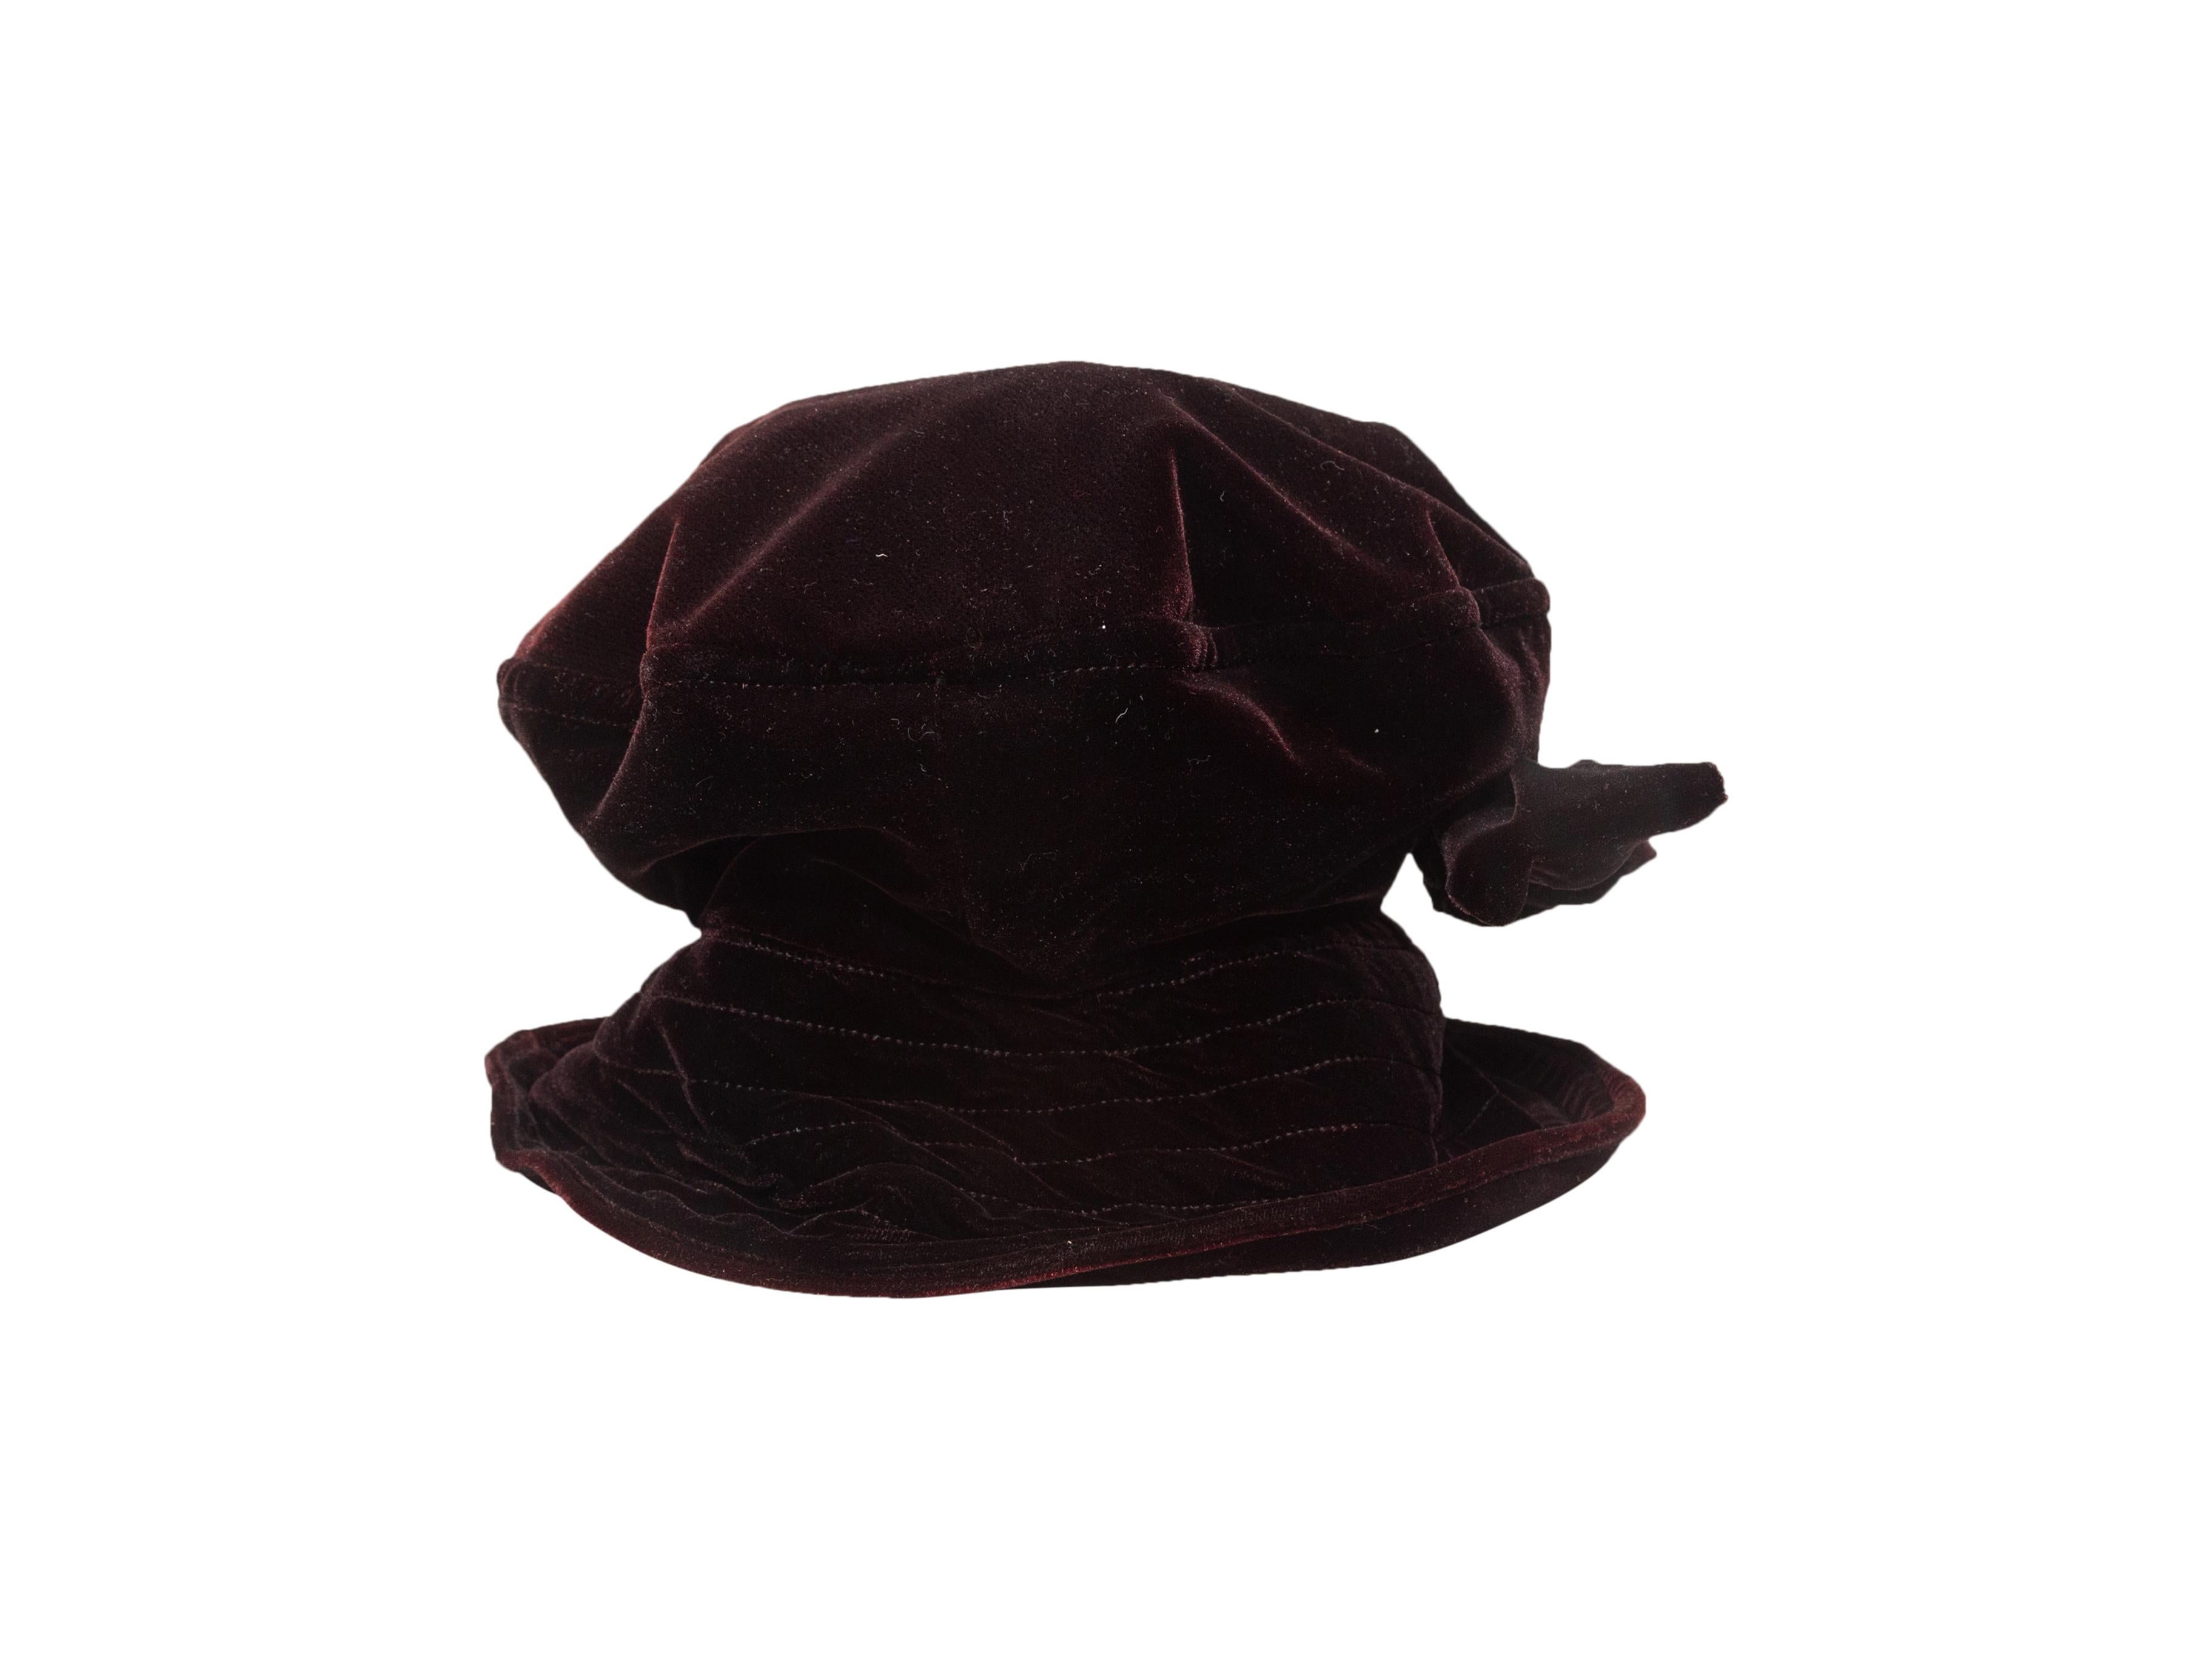 Product Details: Vintage wine and black velvet hat by Kokin. Bow accent at front. 7